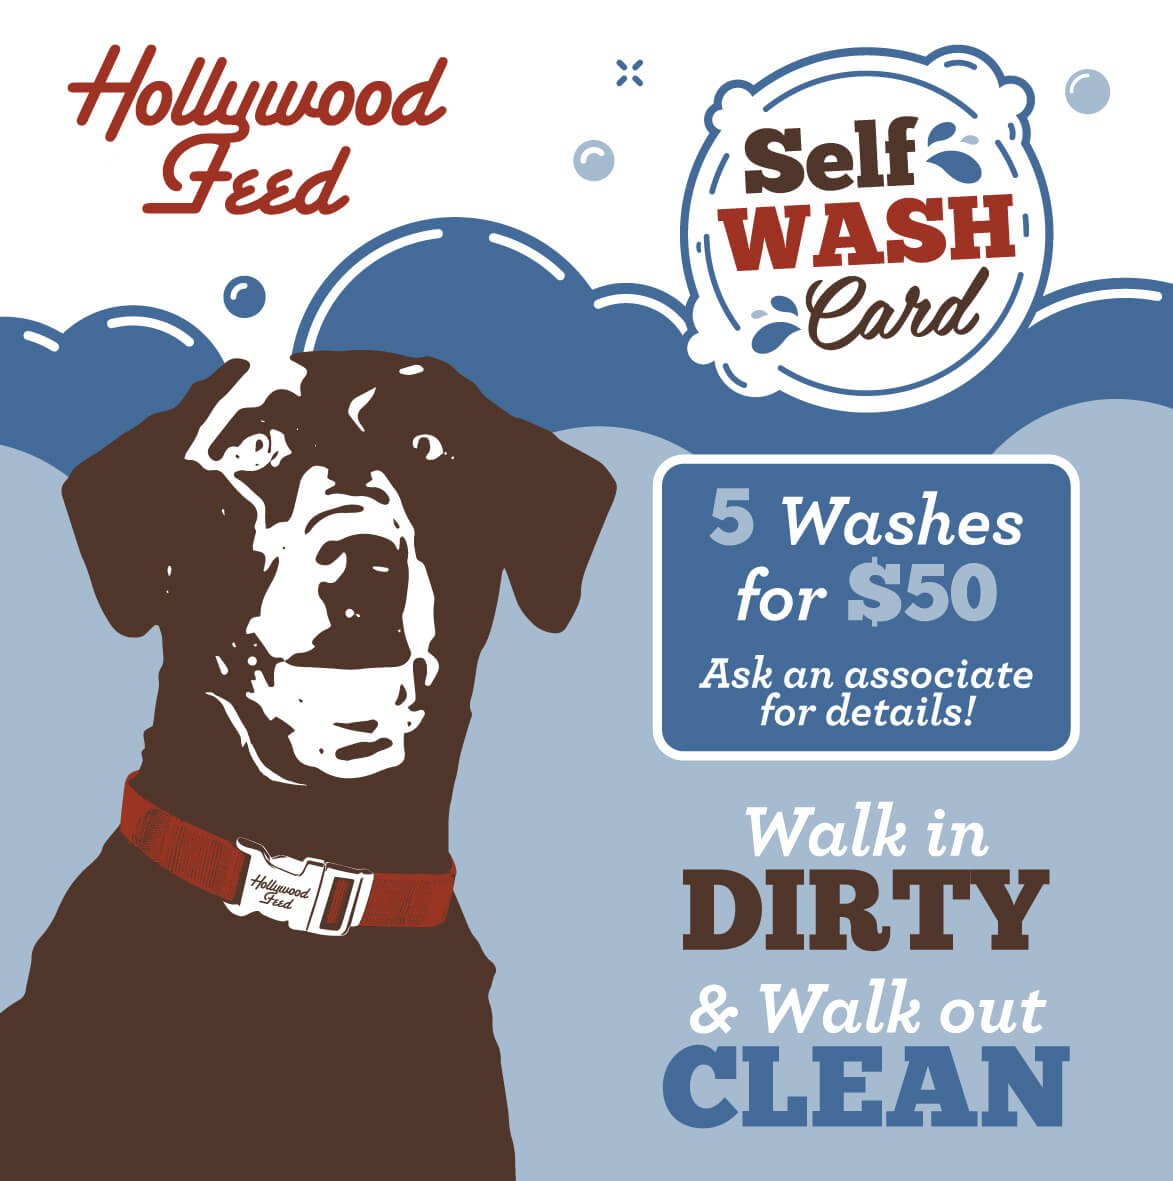 Hollywood Selfwash Card - 5 washes for $50, Ask an Associate for details! Walk in Dirty and Walk Out Clean!